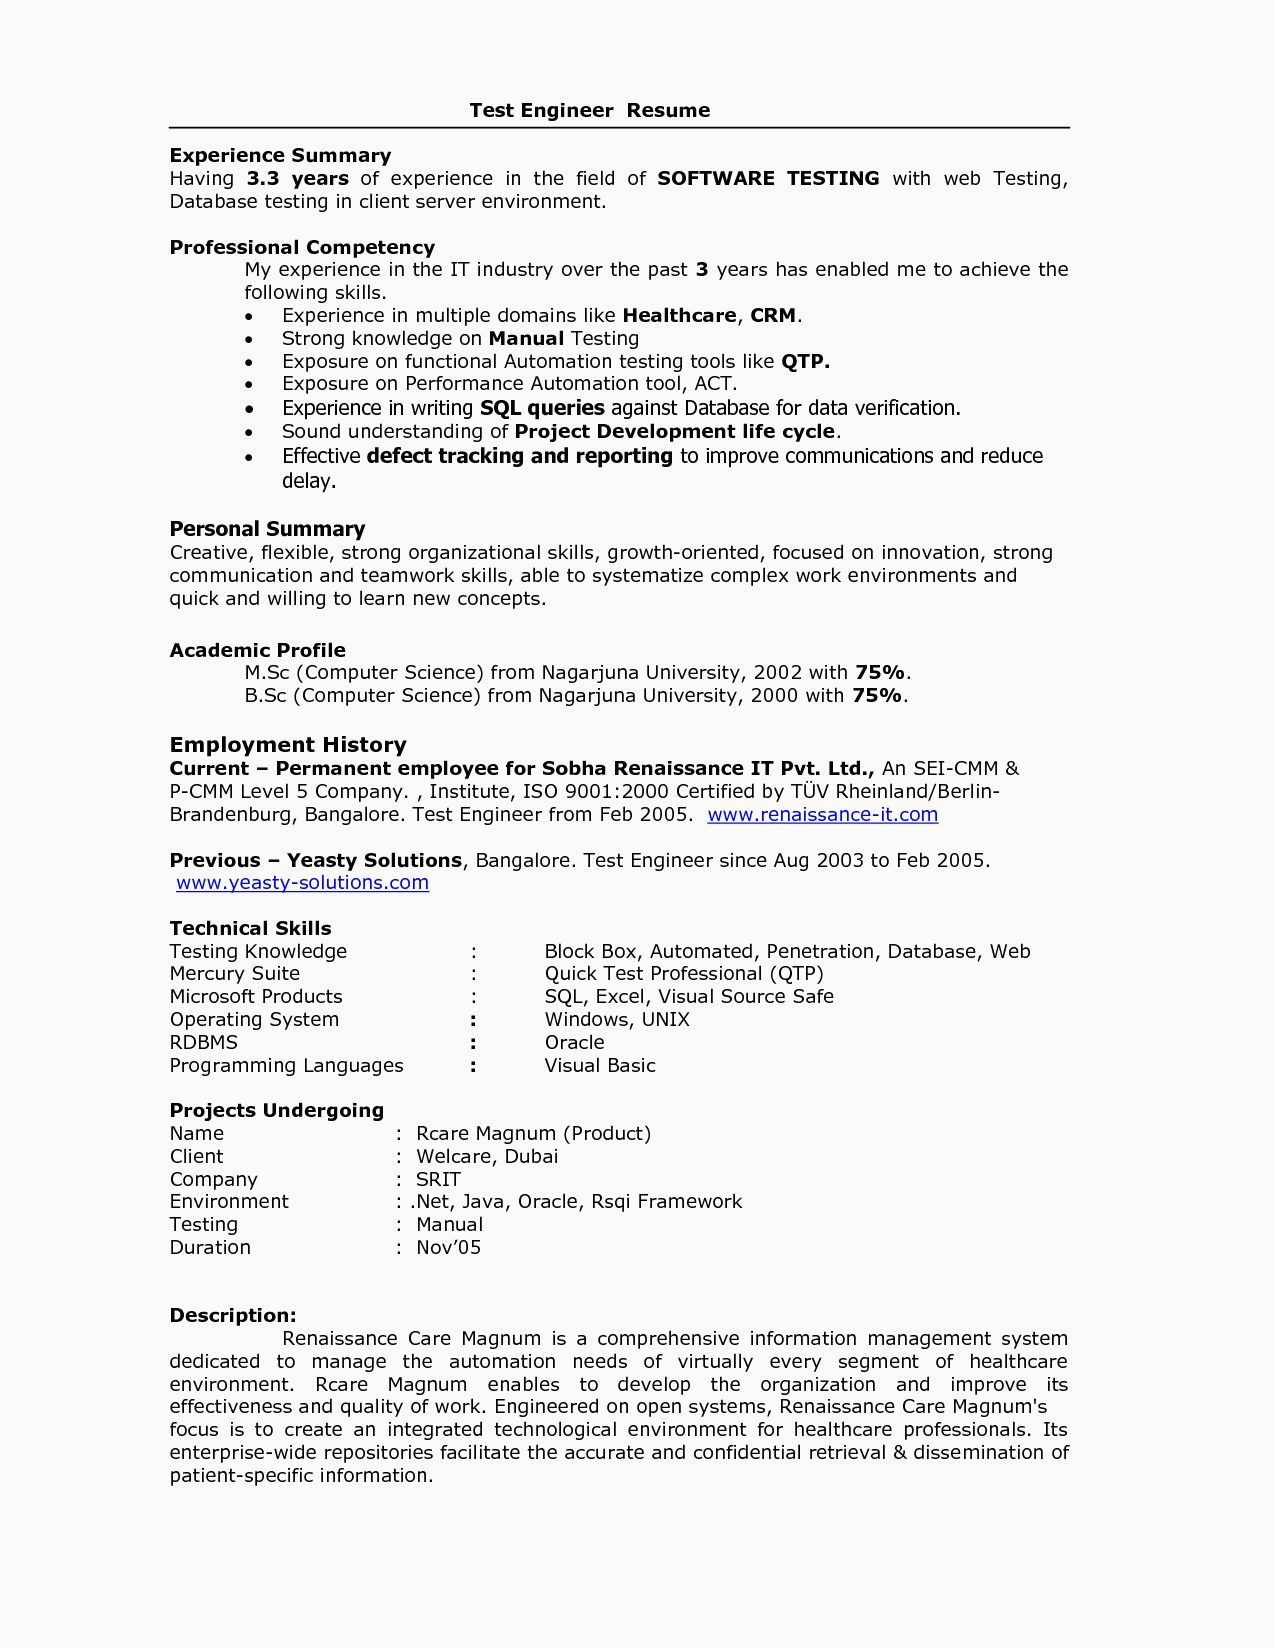 Manual Testing Sample Resume for 2 Years Experience Hr Resume Sample for 2 Years Experience Best Resume Examples